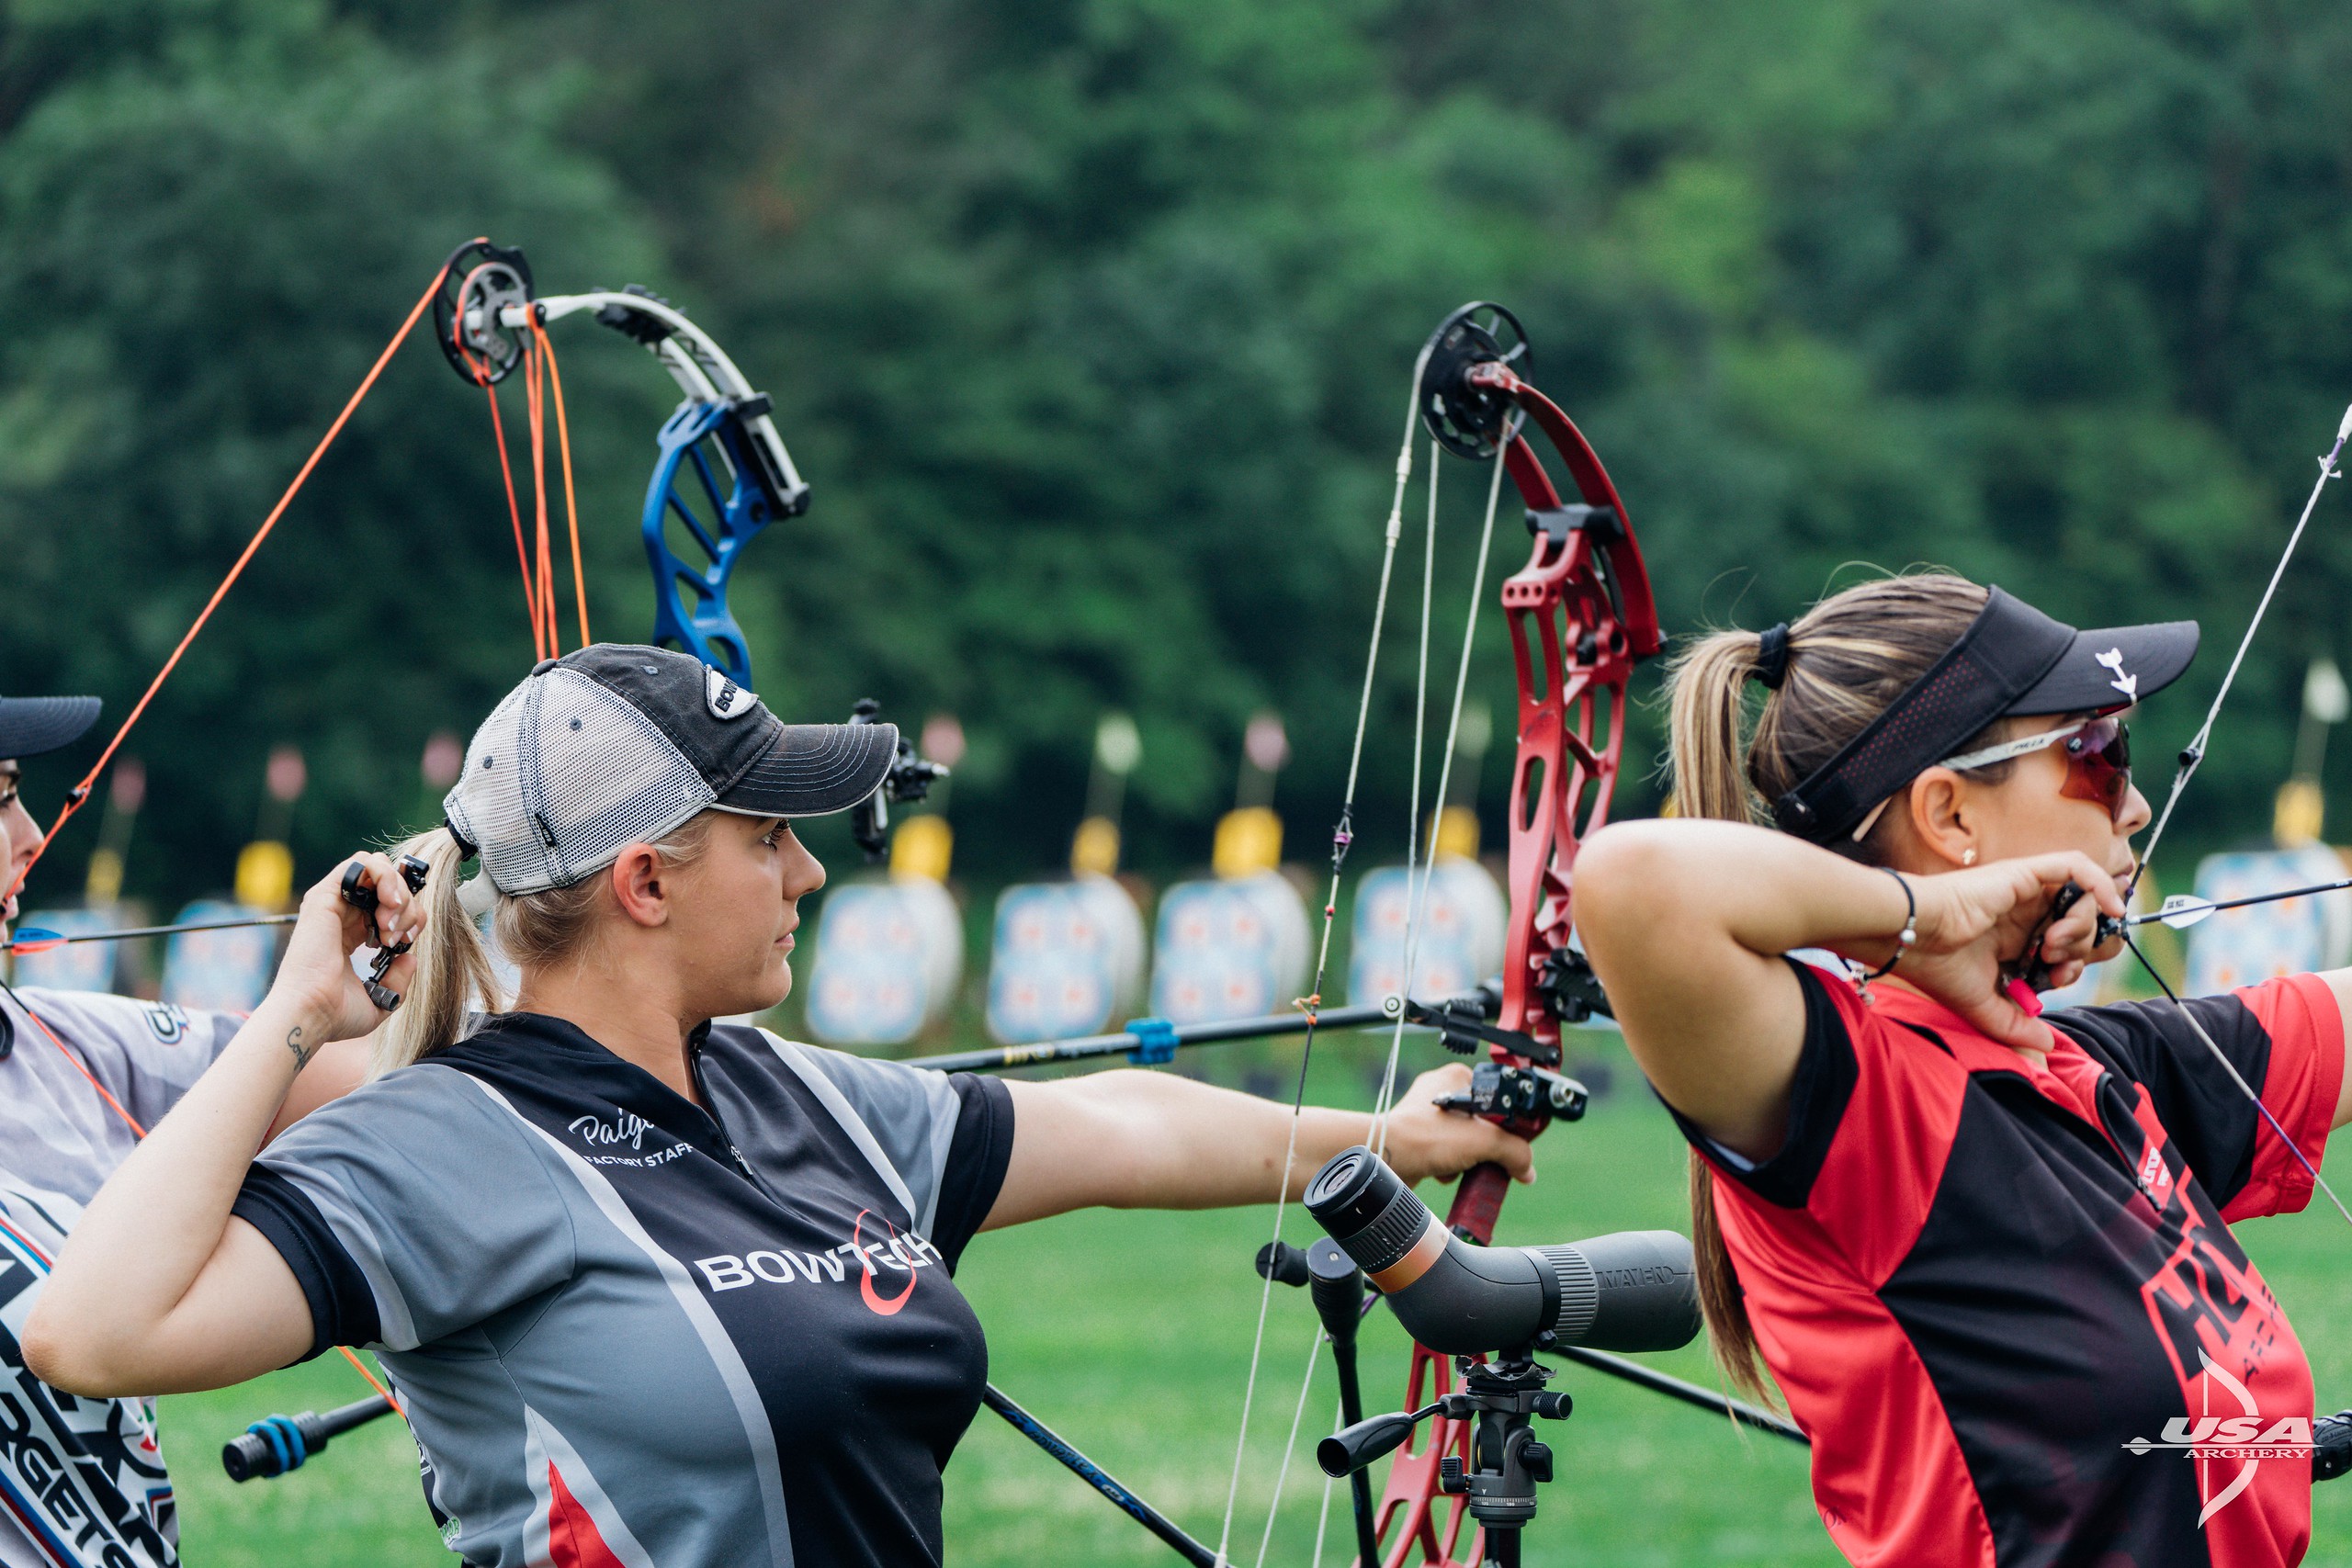 138th USA Archery Target Nationals Opens in Pennsylvania